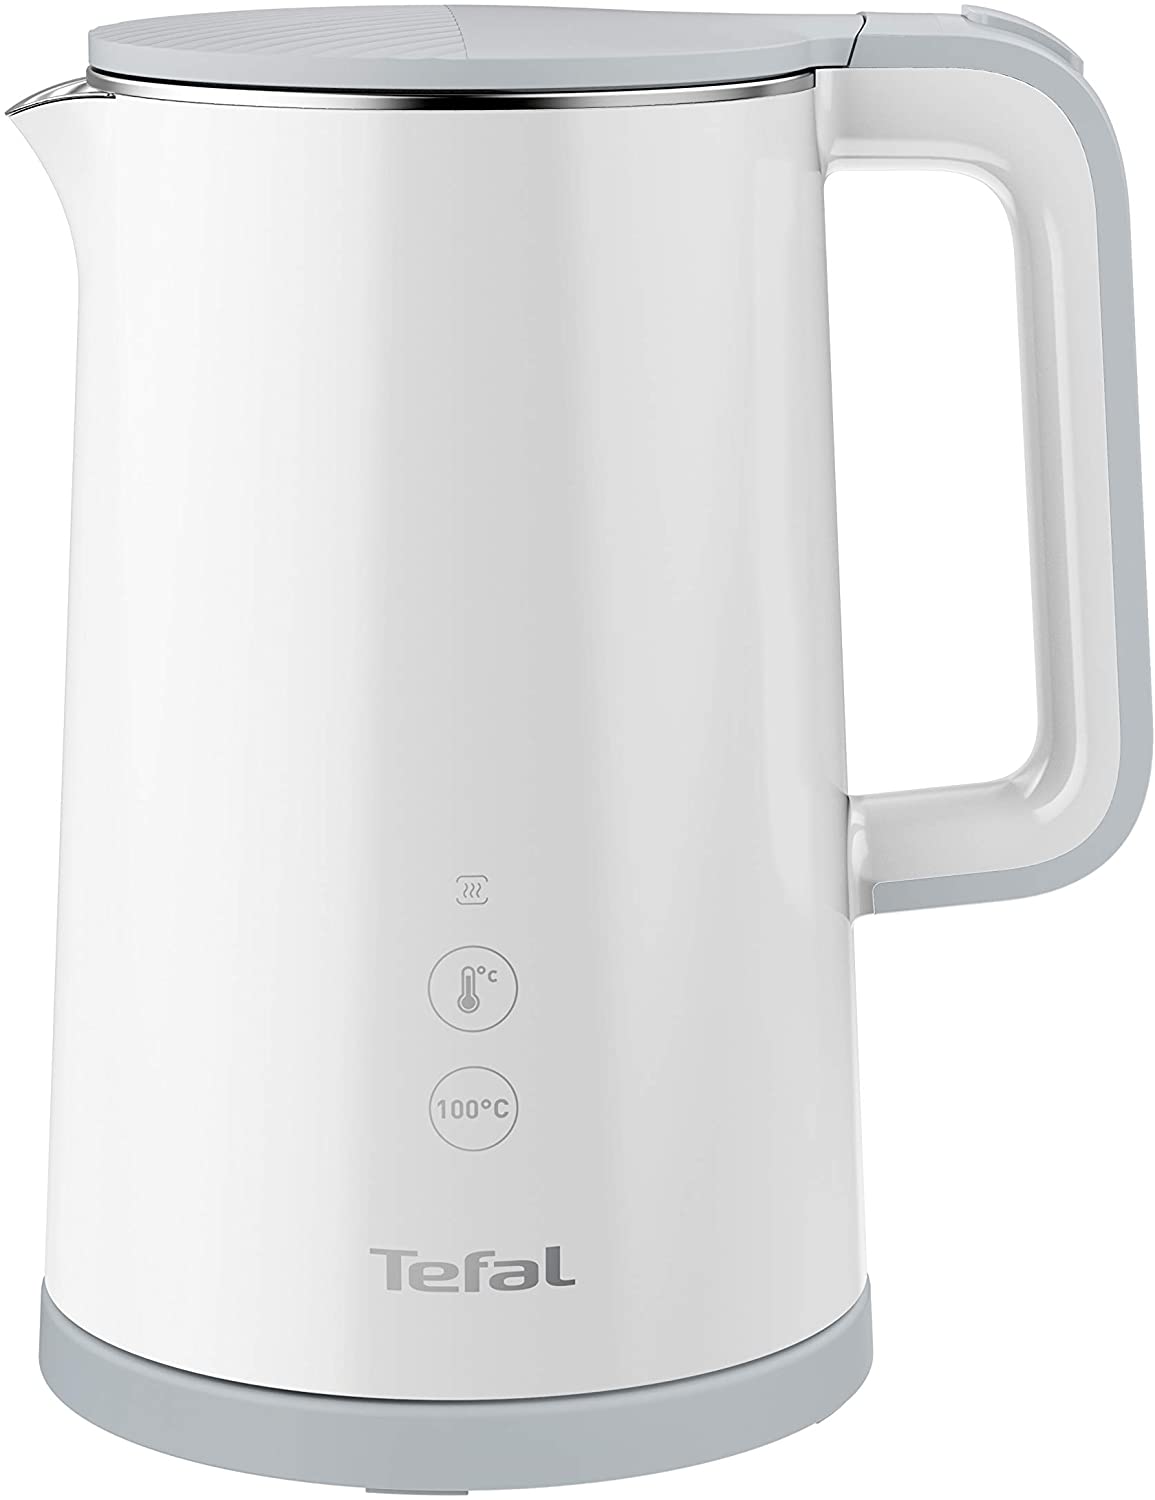 Tefal KO6931 Sense Kettle, 1.5 Litre Capacity, Digital Display, 5 Temperature Levels, 360° Base, Water Level, Removable Limescale Filter, 30 Minutes Keep Warm Function, White